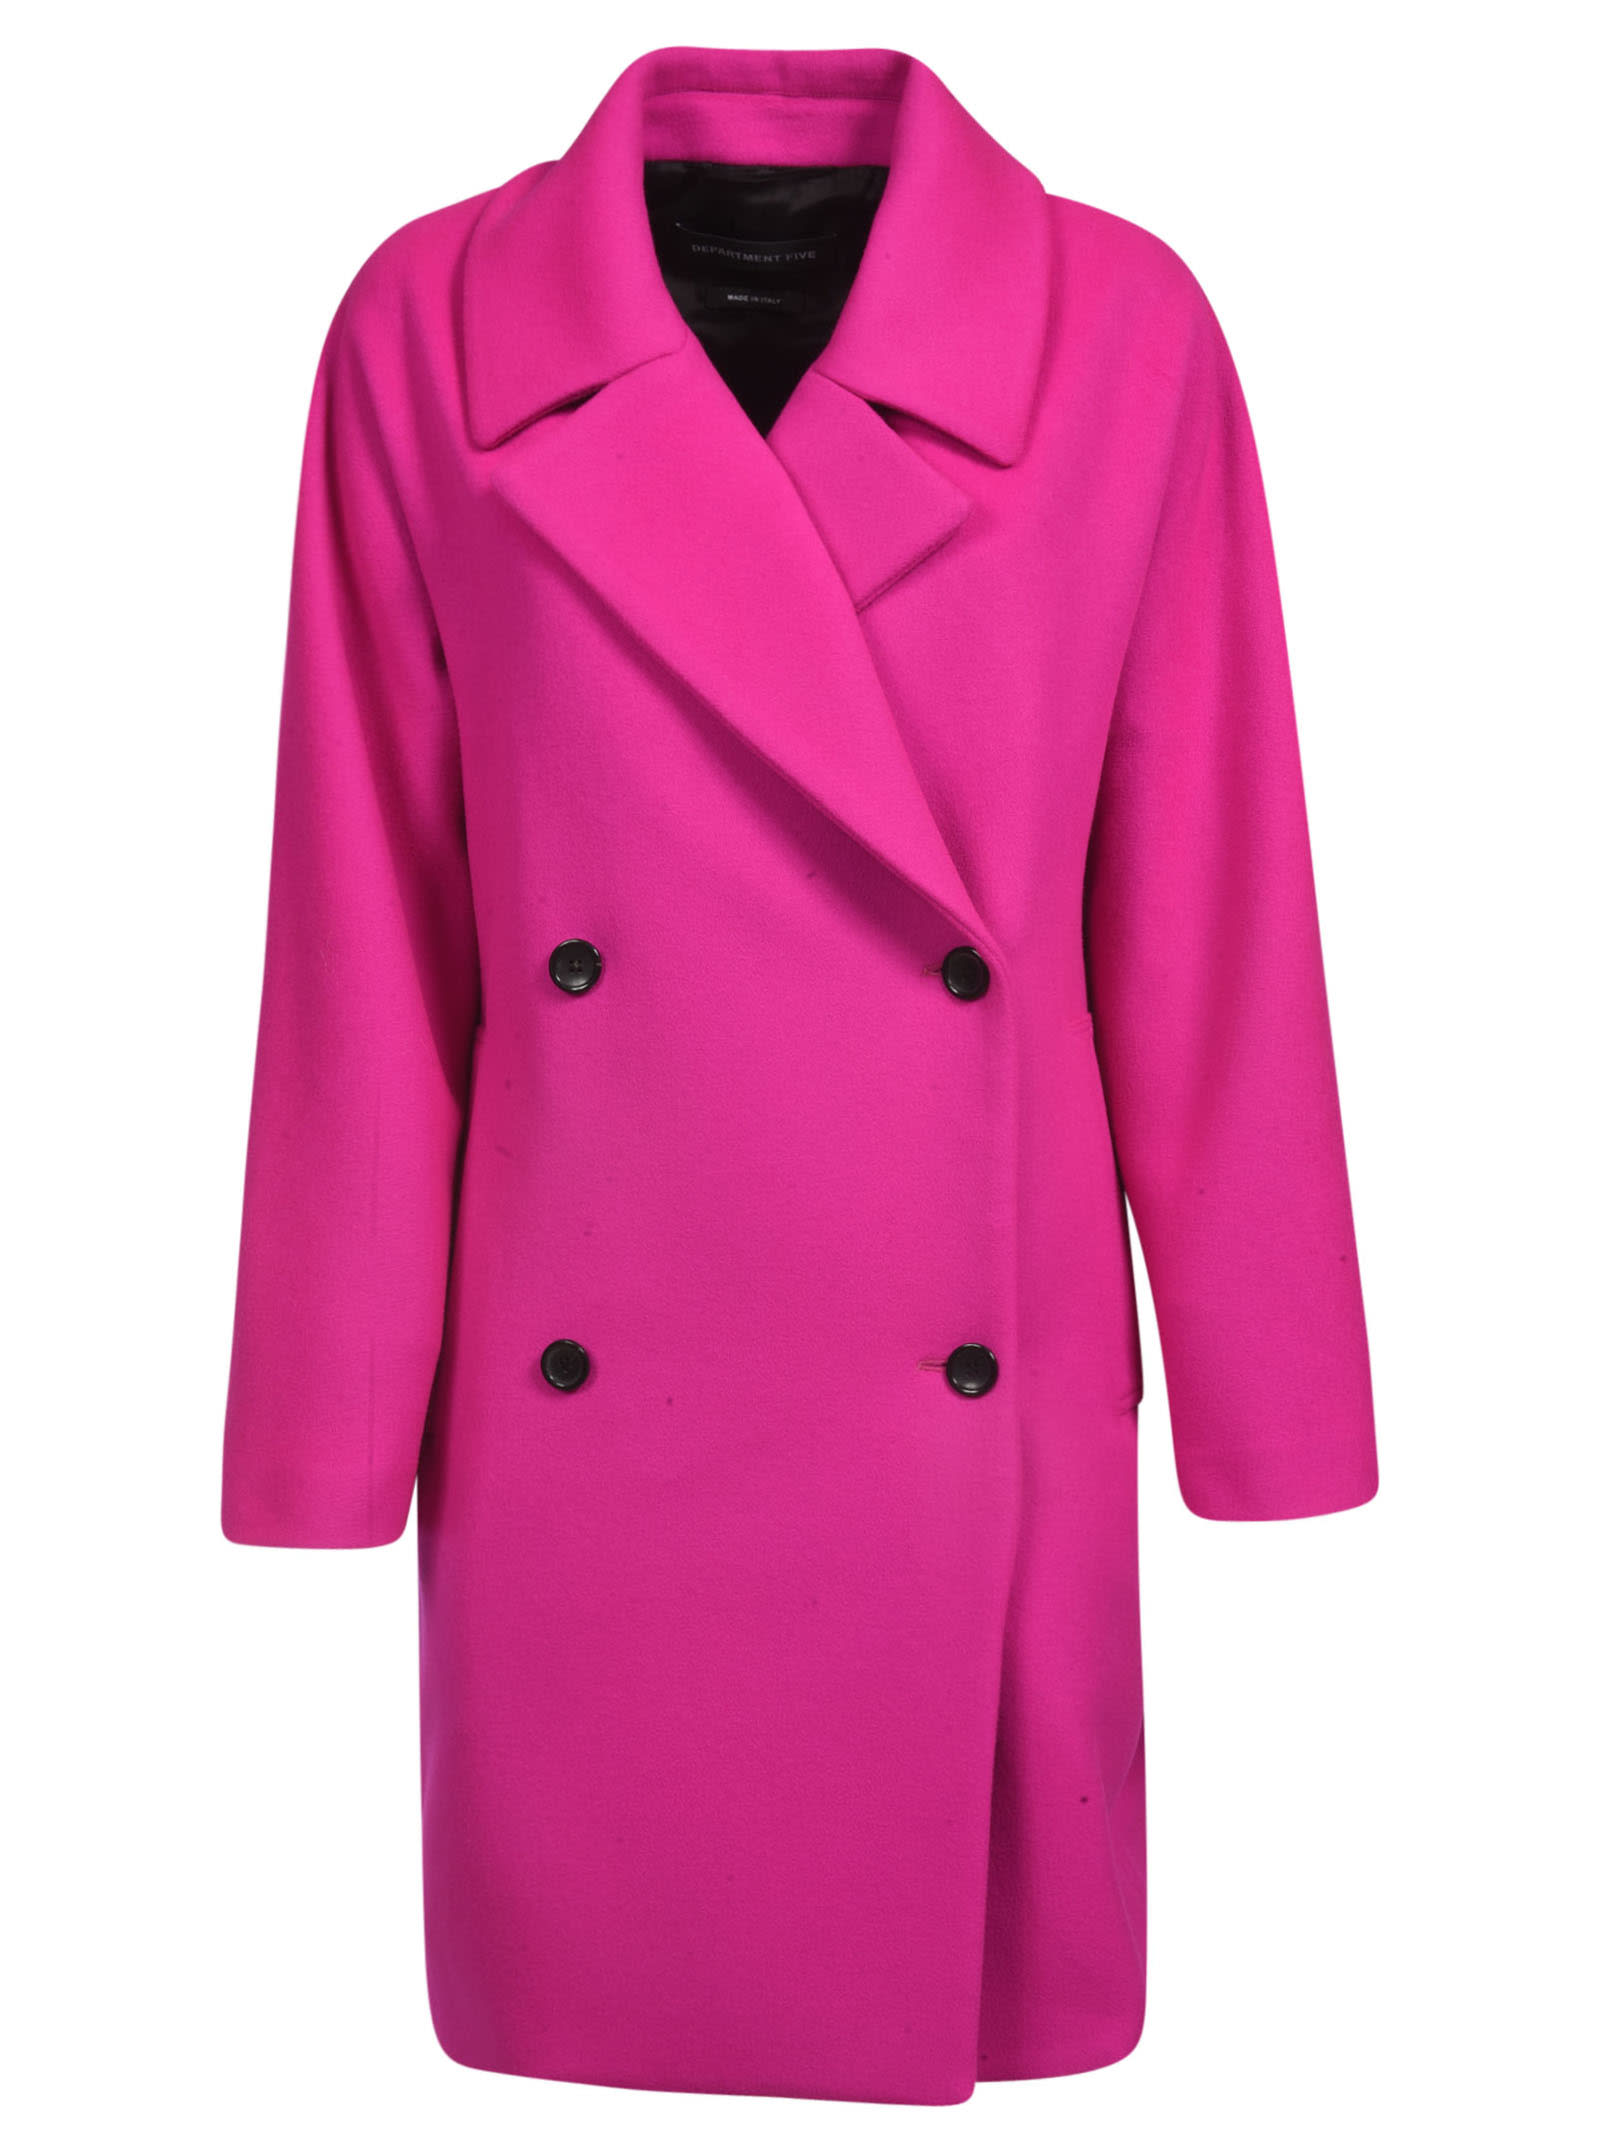 Department 5 Double-Breasted Mid-Length Coat